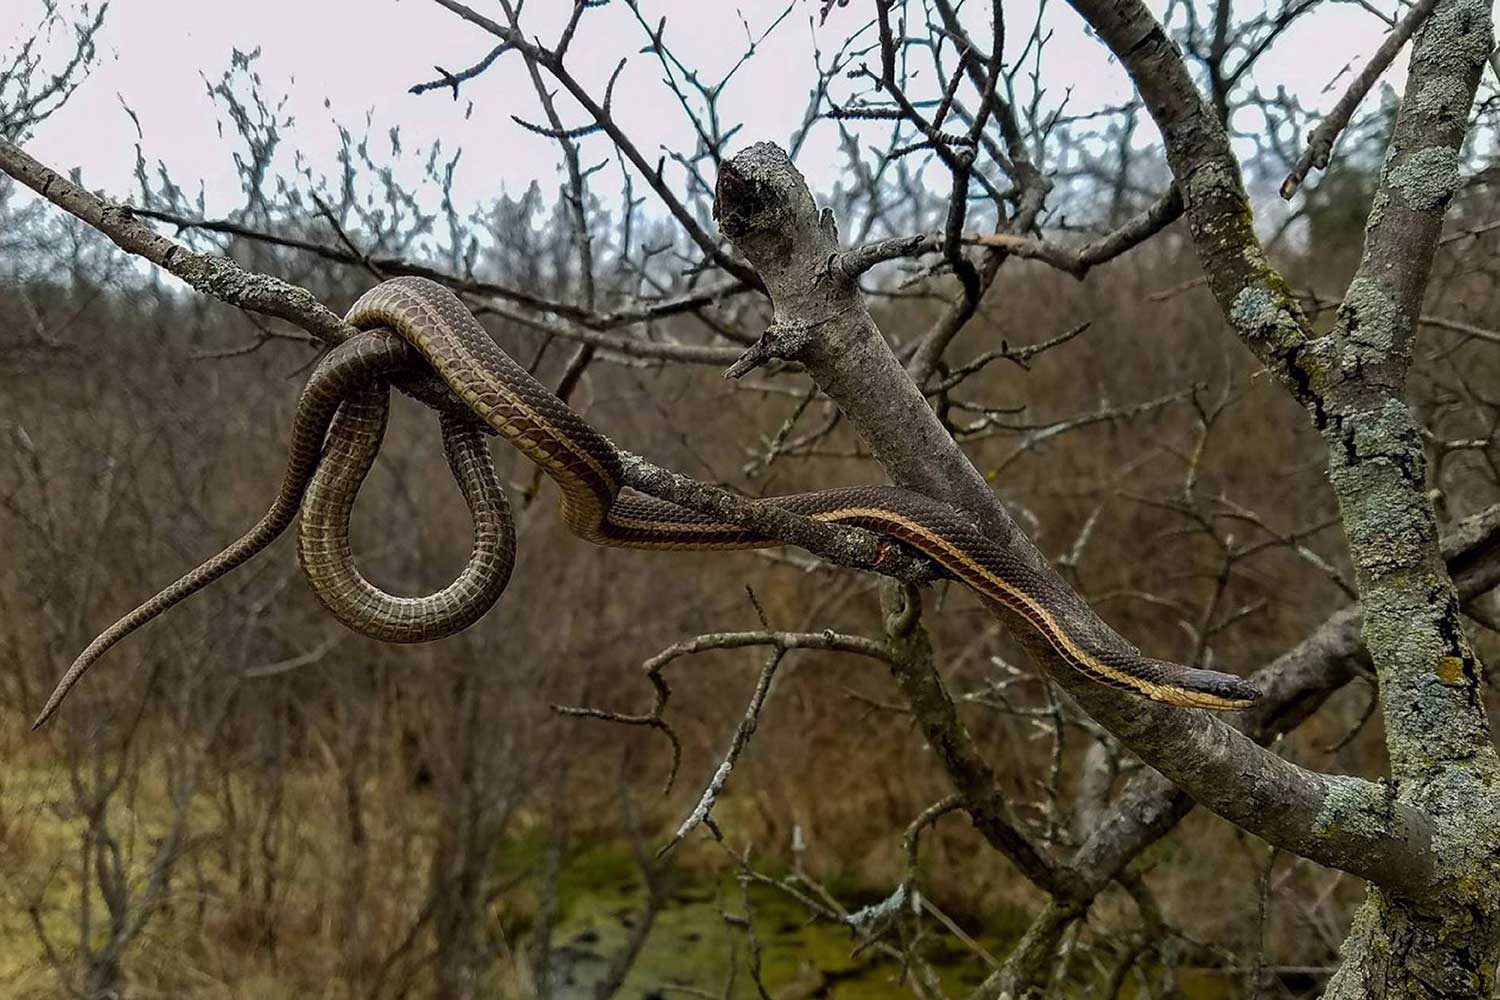 A queen snake hanging from the branch of a bare tree.